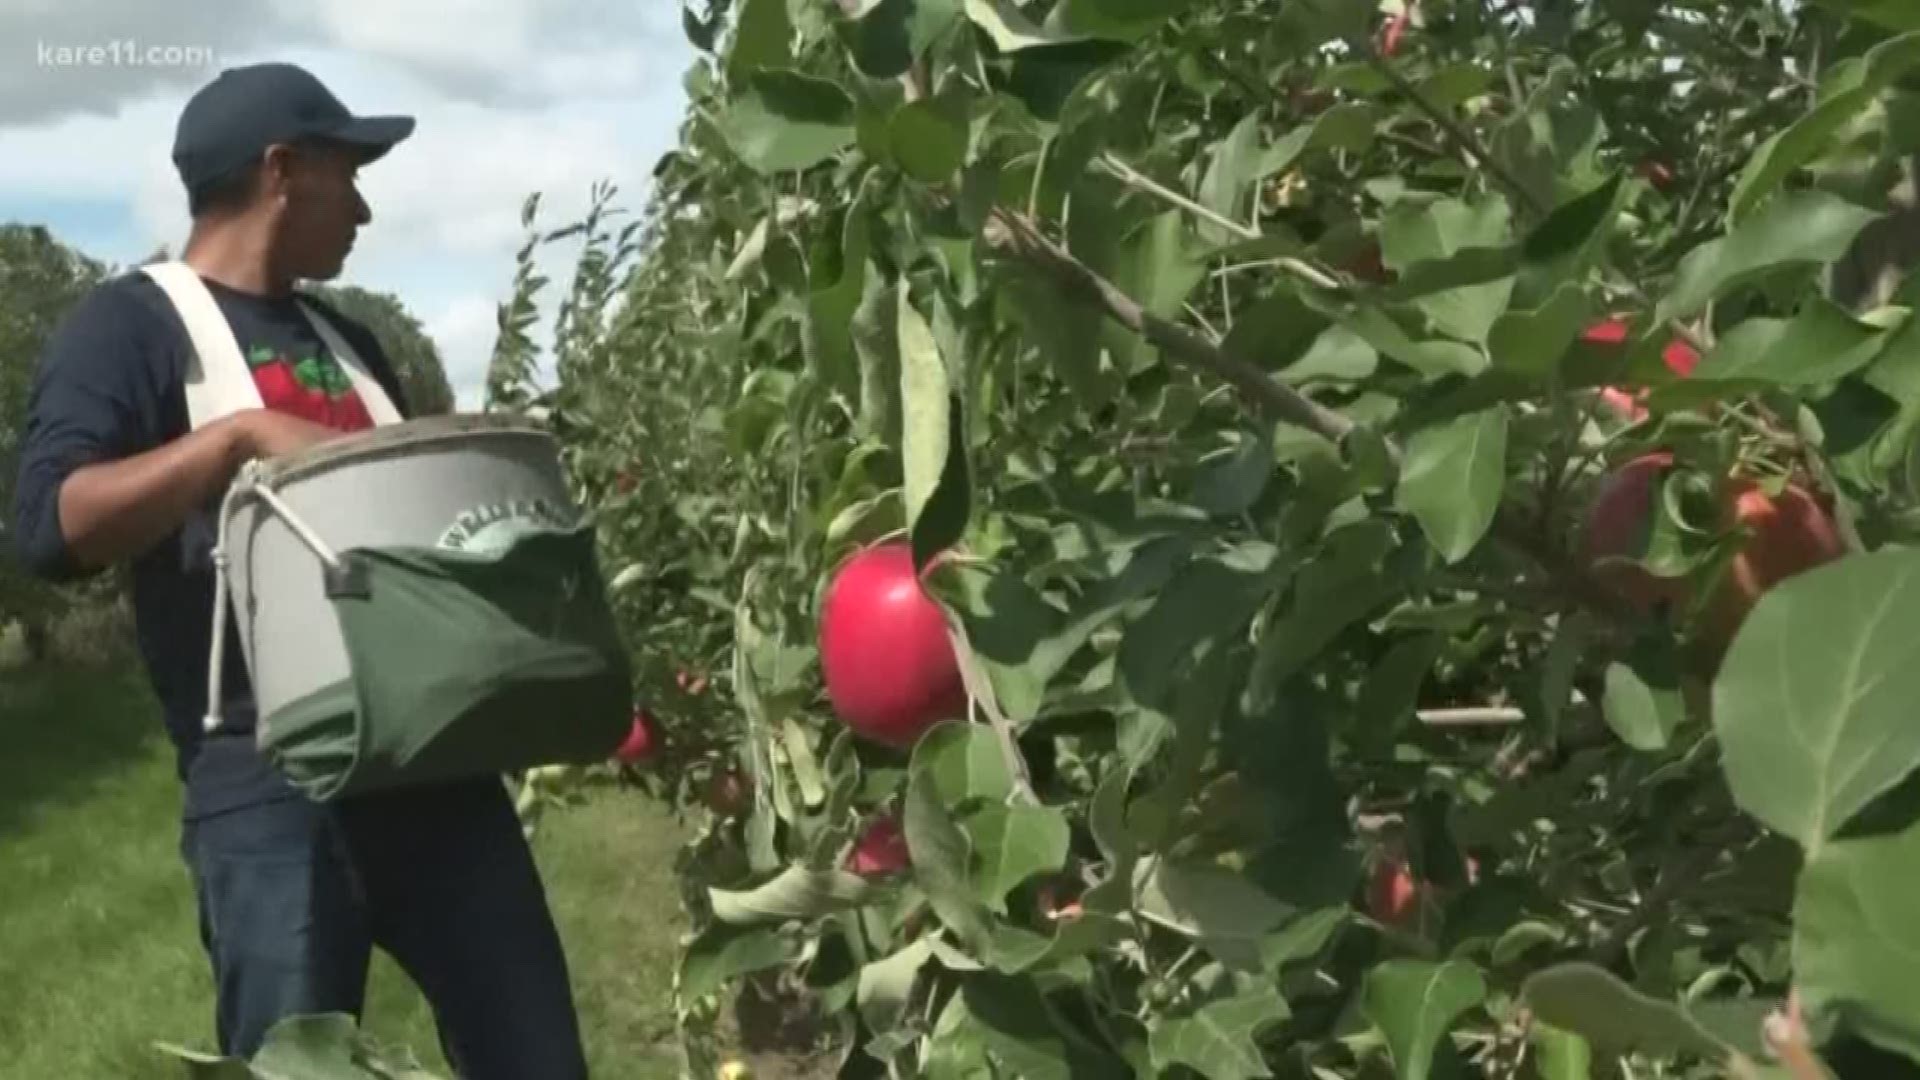 We're moving on to apple picking season... and the folks at Pine Tree Apple Orchard tell us it's a great crop, but there have been challenges.